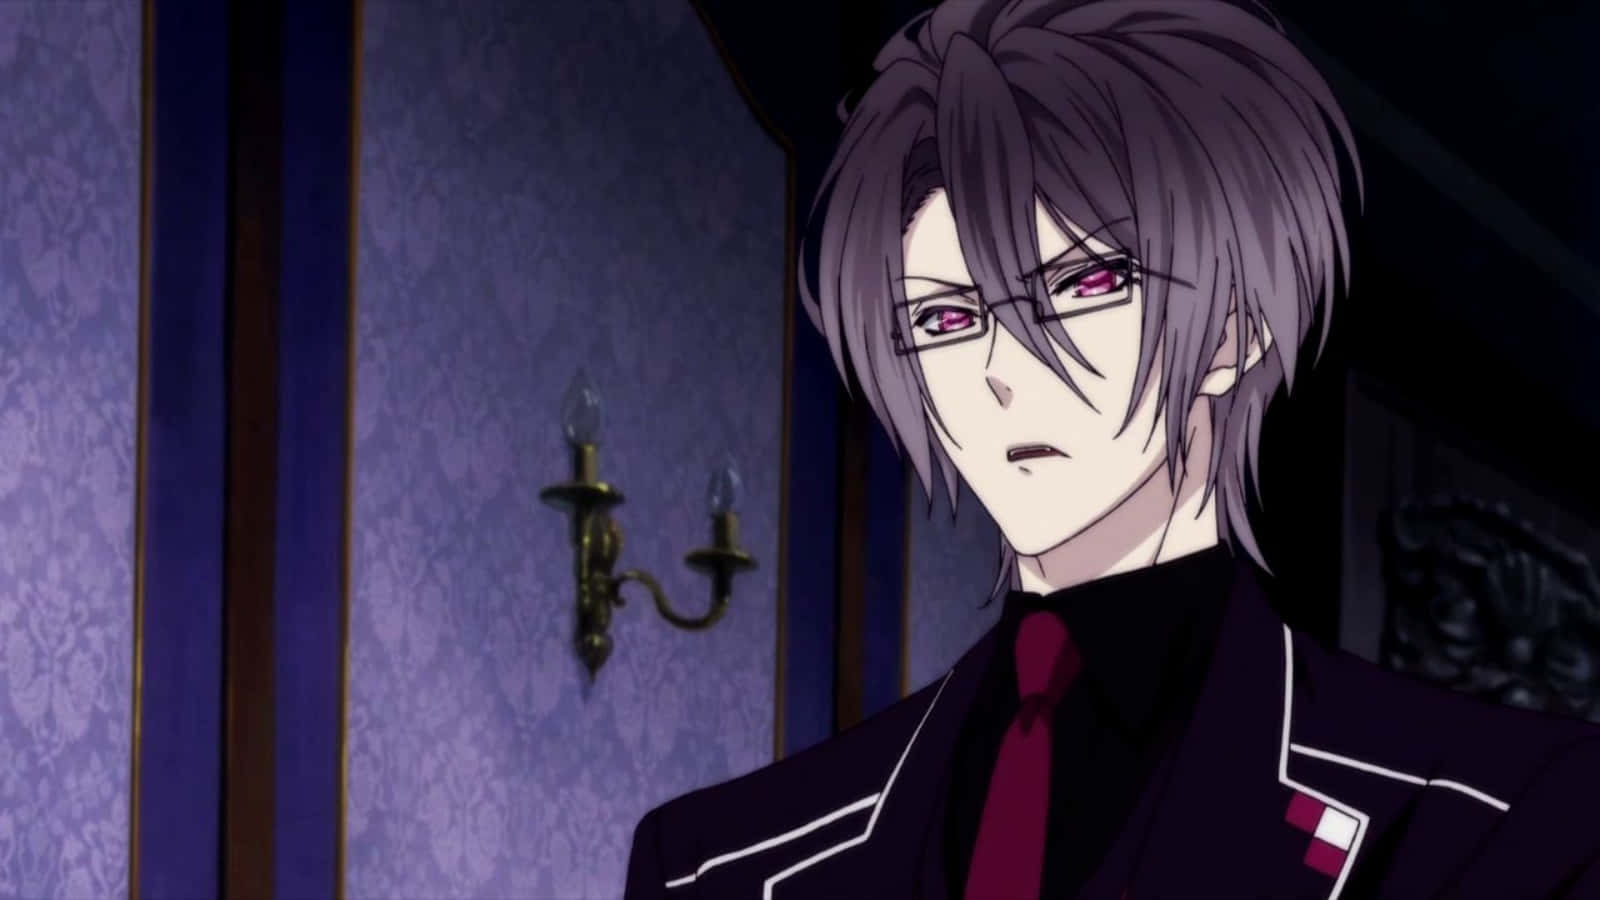 "Live out your supernatural fantasies with Diabolik Lovers"